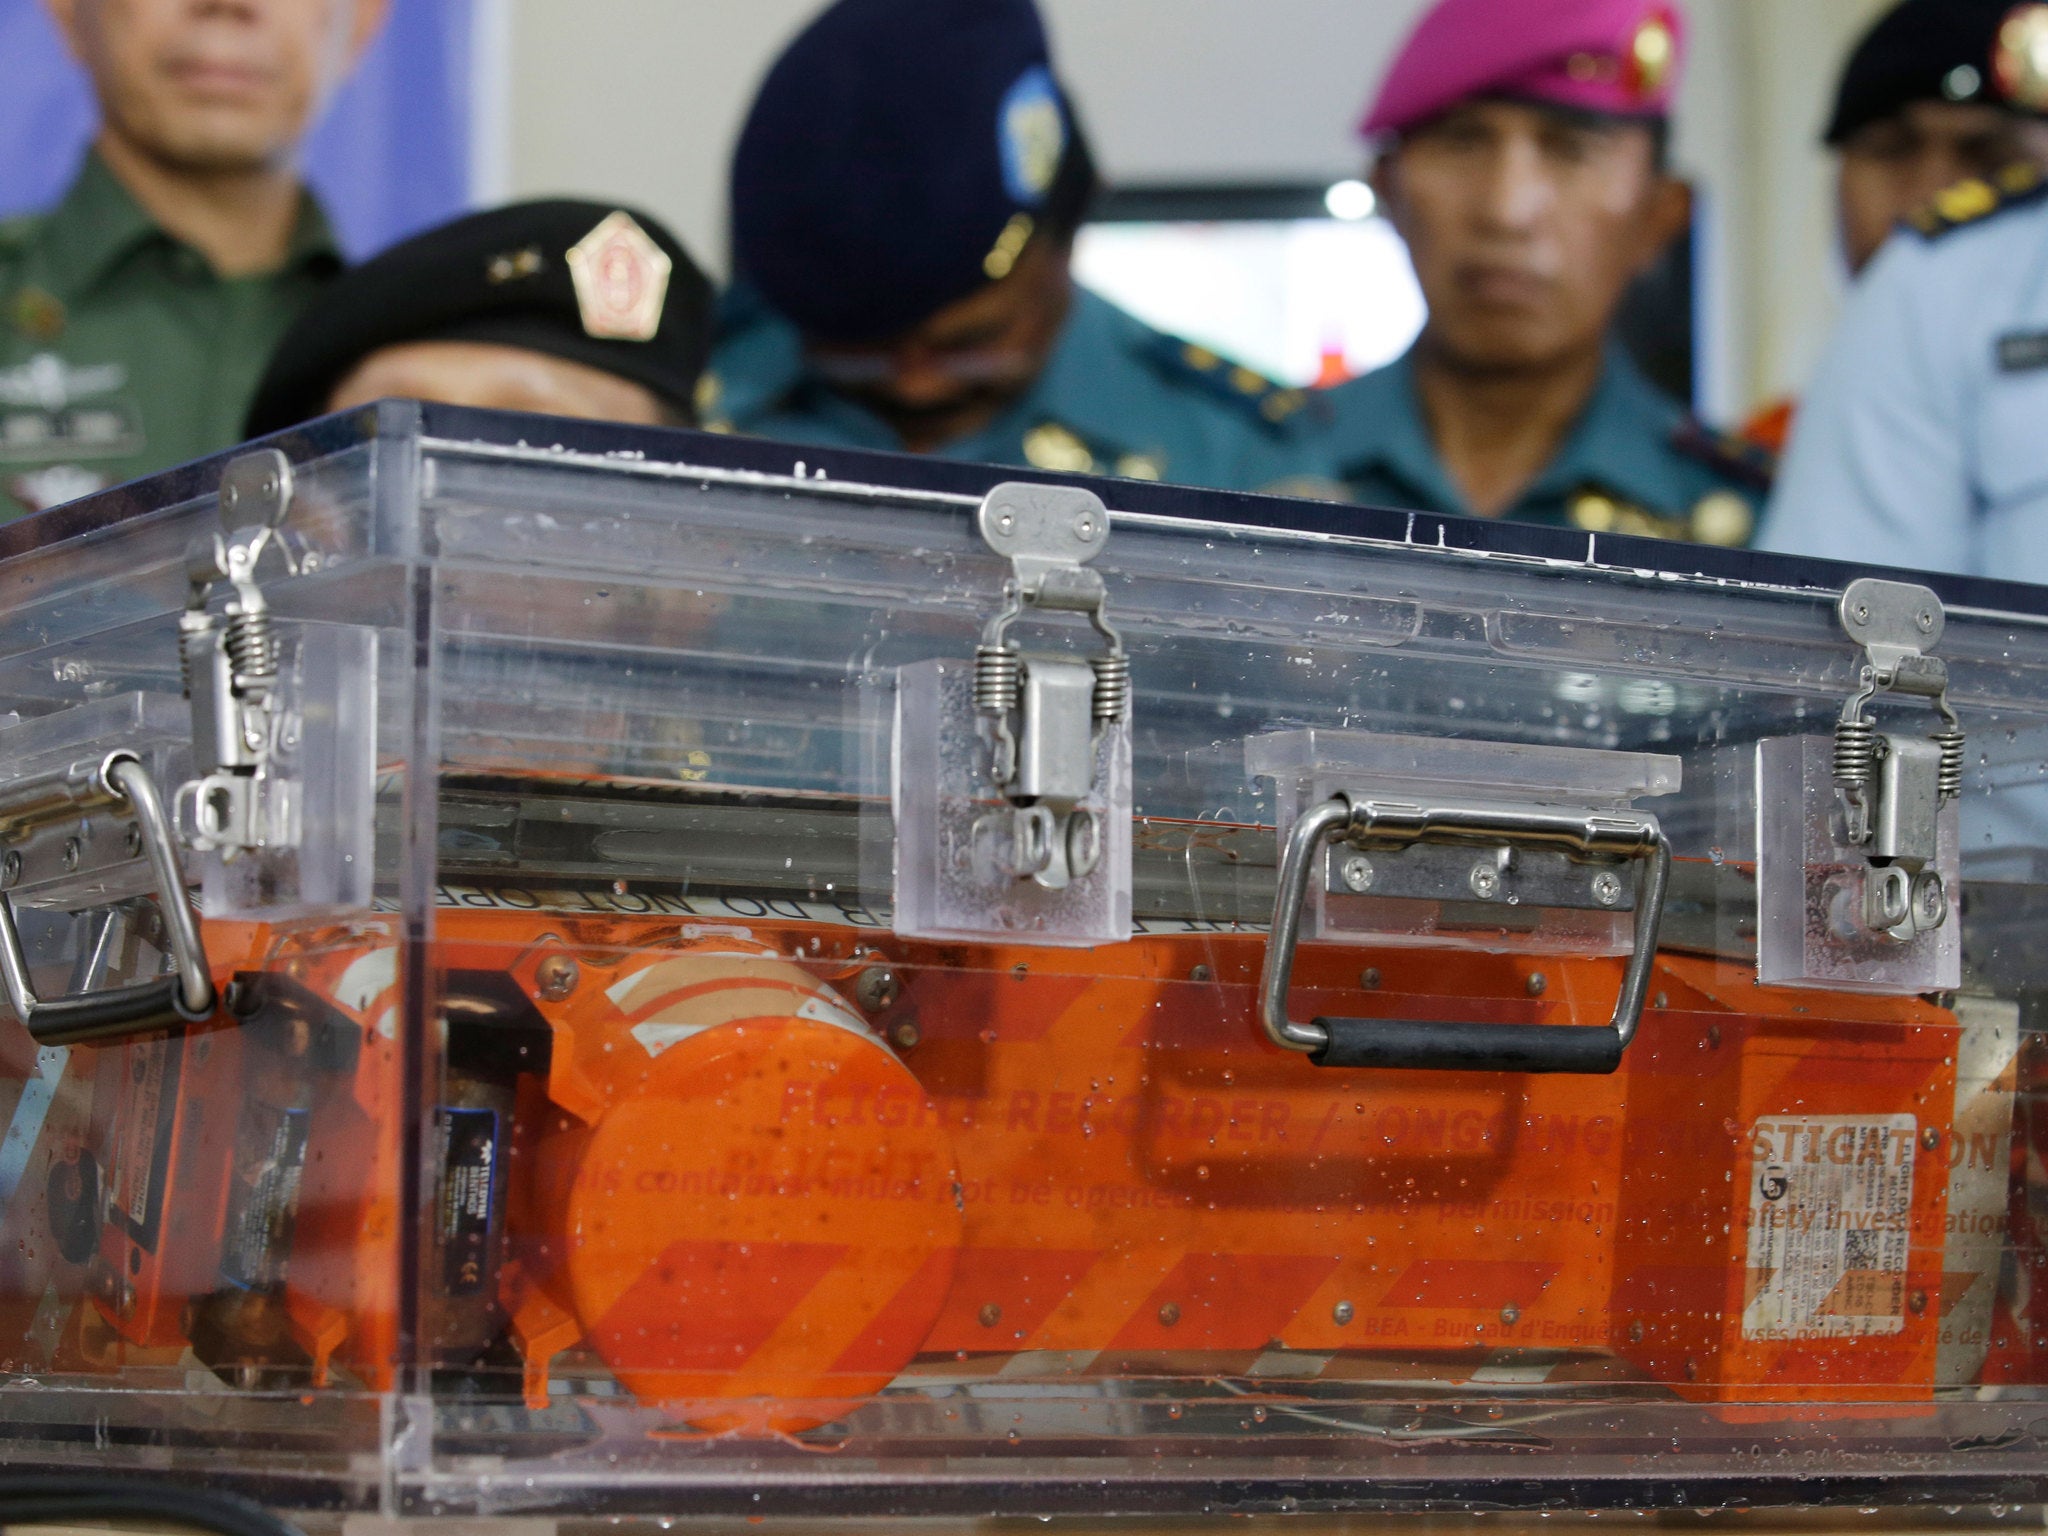 A black box of the ill-fated AirAsia Flight 8501 that crashed in the Java Sea, is briefly displayed at airport in Pangkalan Bun, Indonesia, Monday, Jan. 12, 2015.